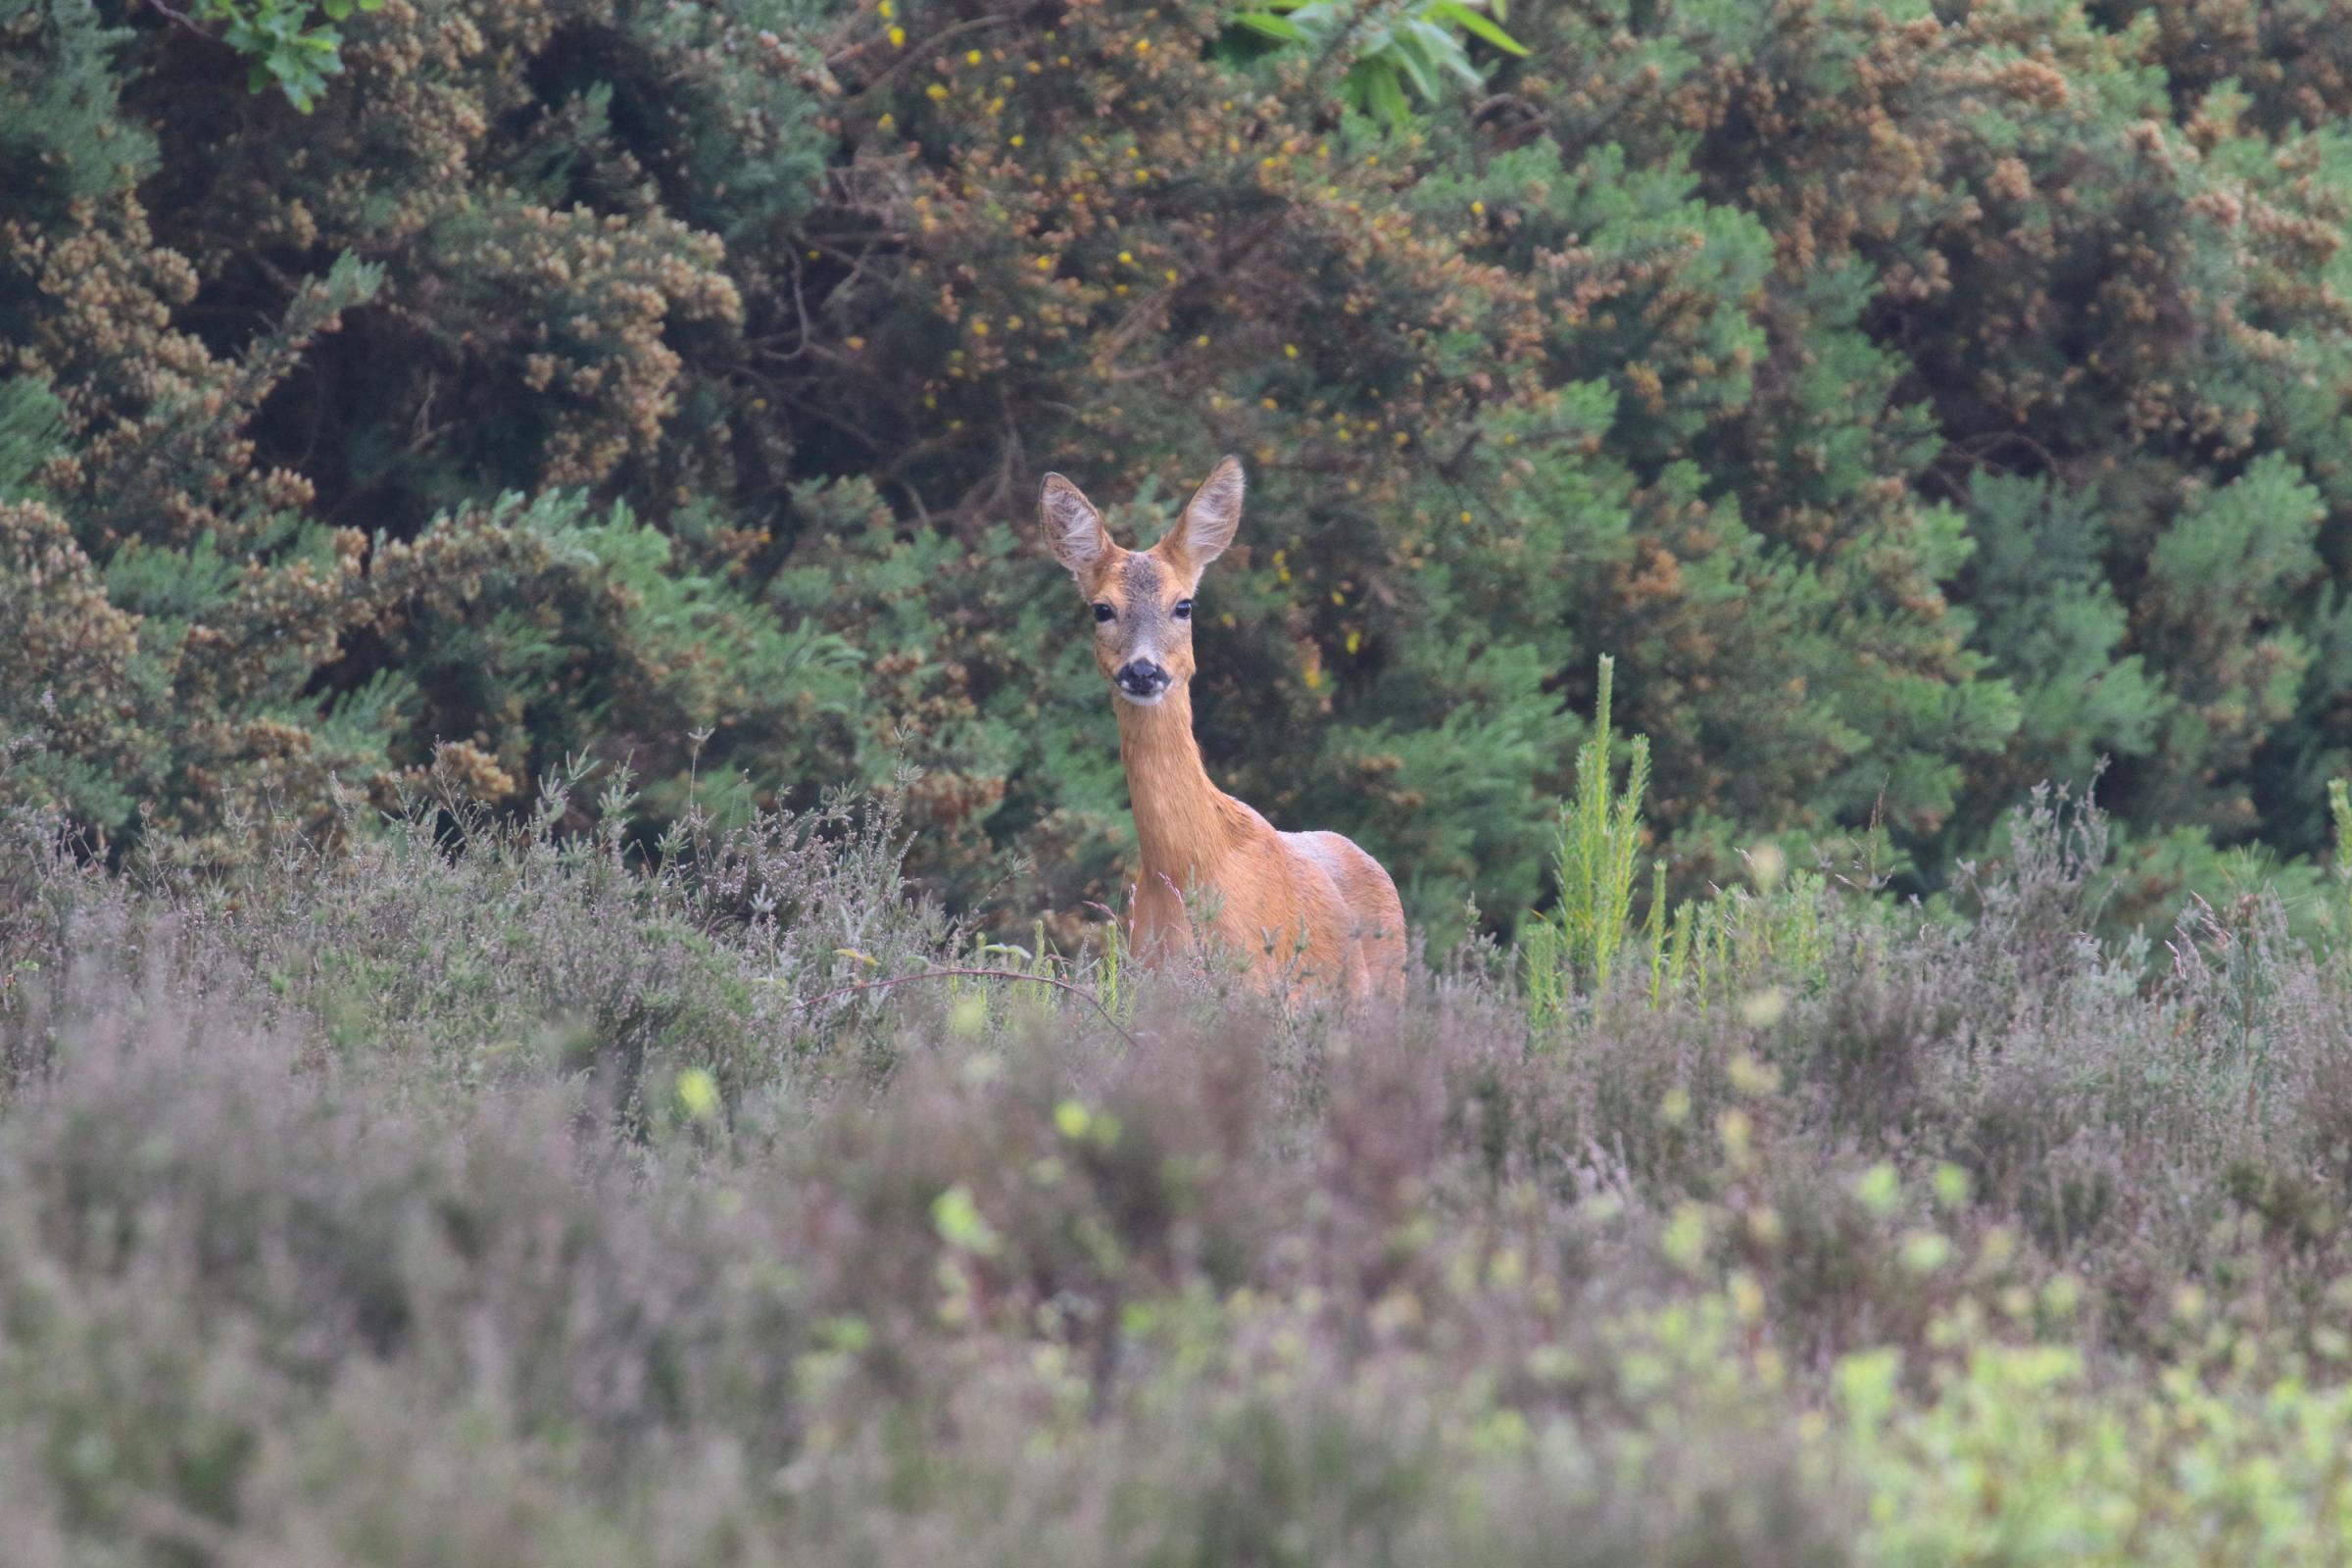 A Spotted by red deer at Caesars Camp Swinley Forest near Bracknell. Picture credit: Alamy/PA